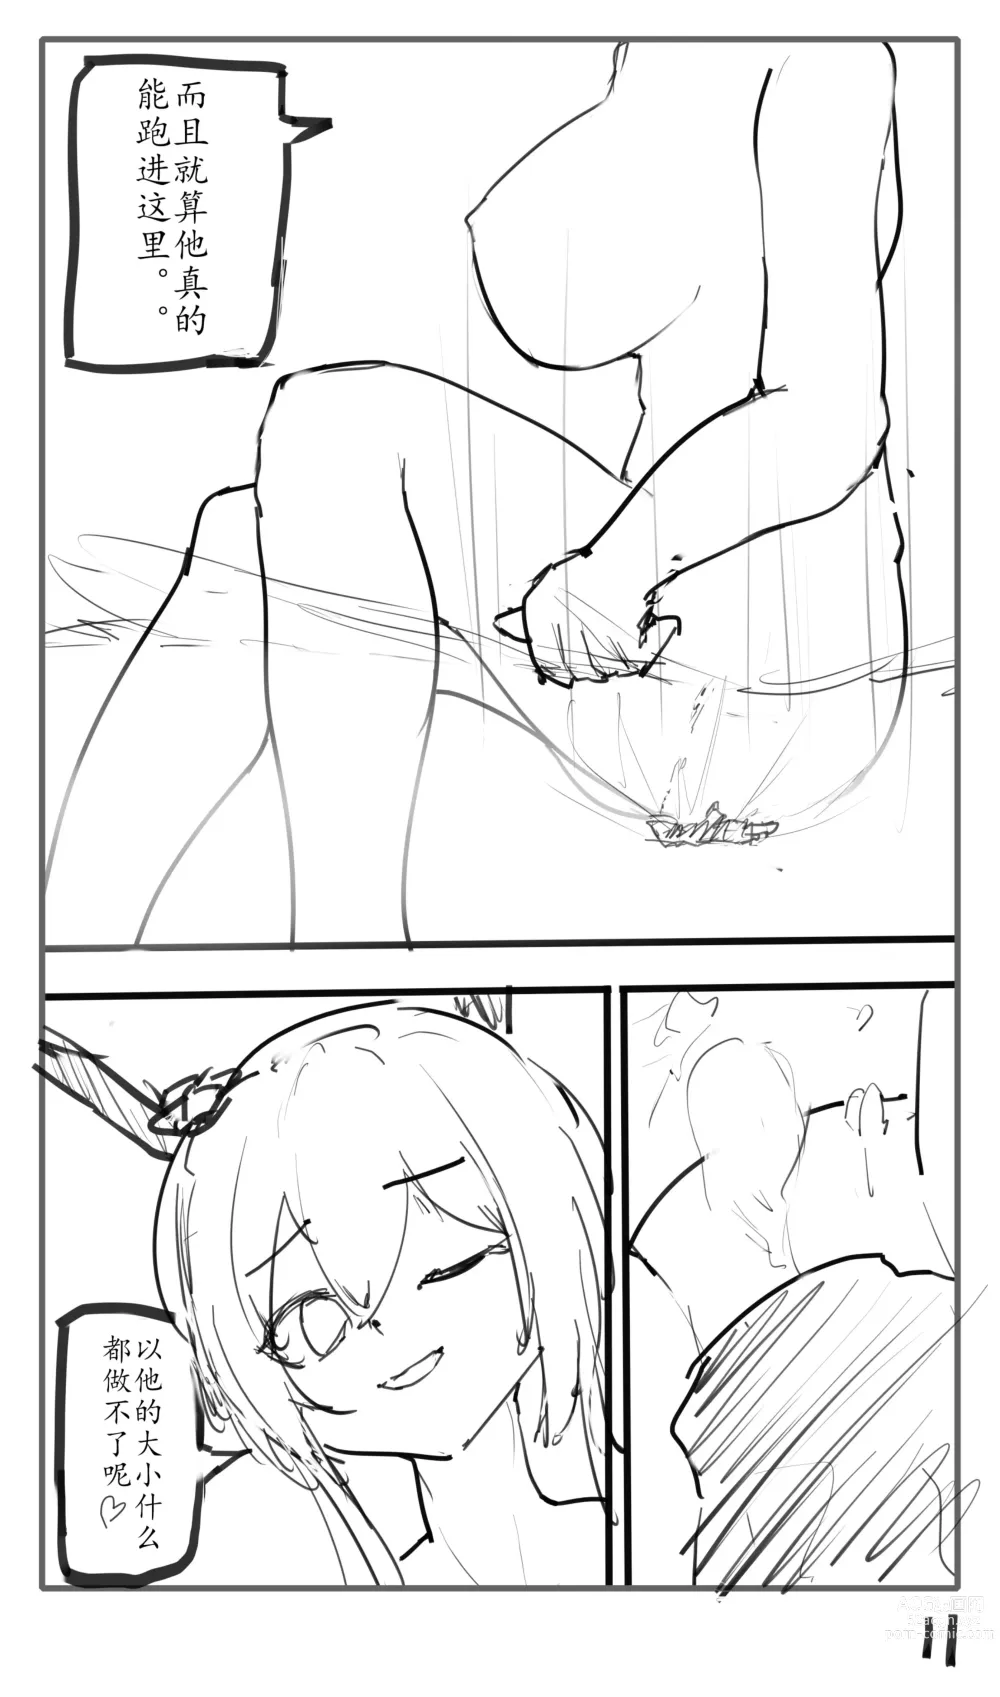 Page 28 of doujinshi Small Doctor on the Beach